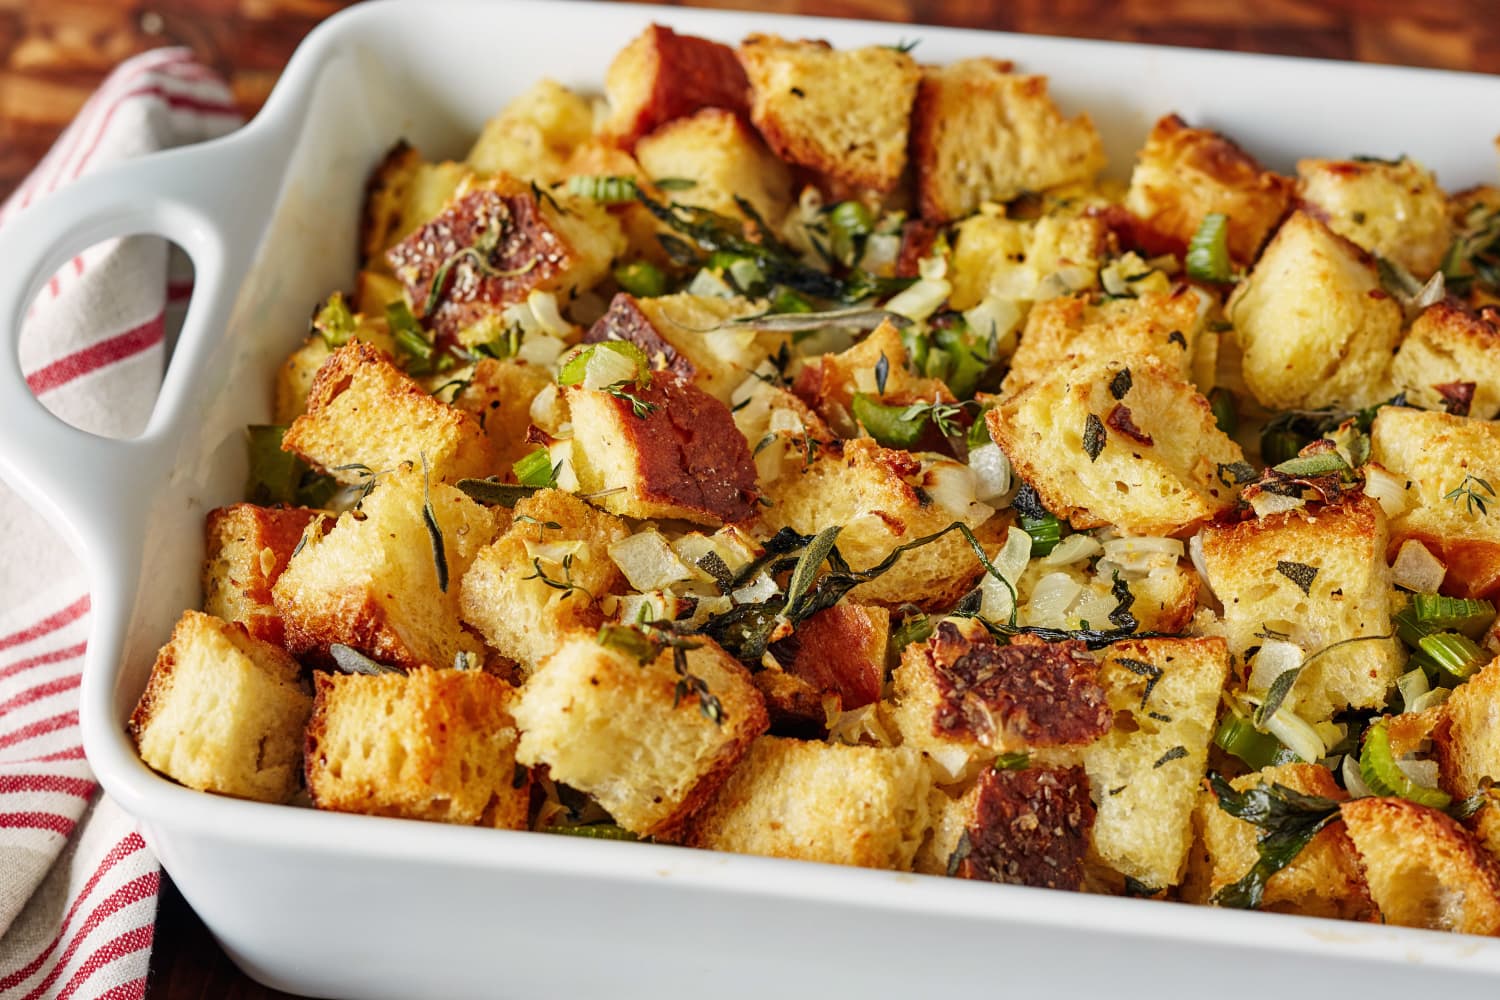 How To Make Thanksgiving Stuffing: The Best Classic Recipe | Kitchn